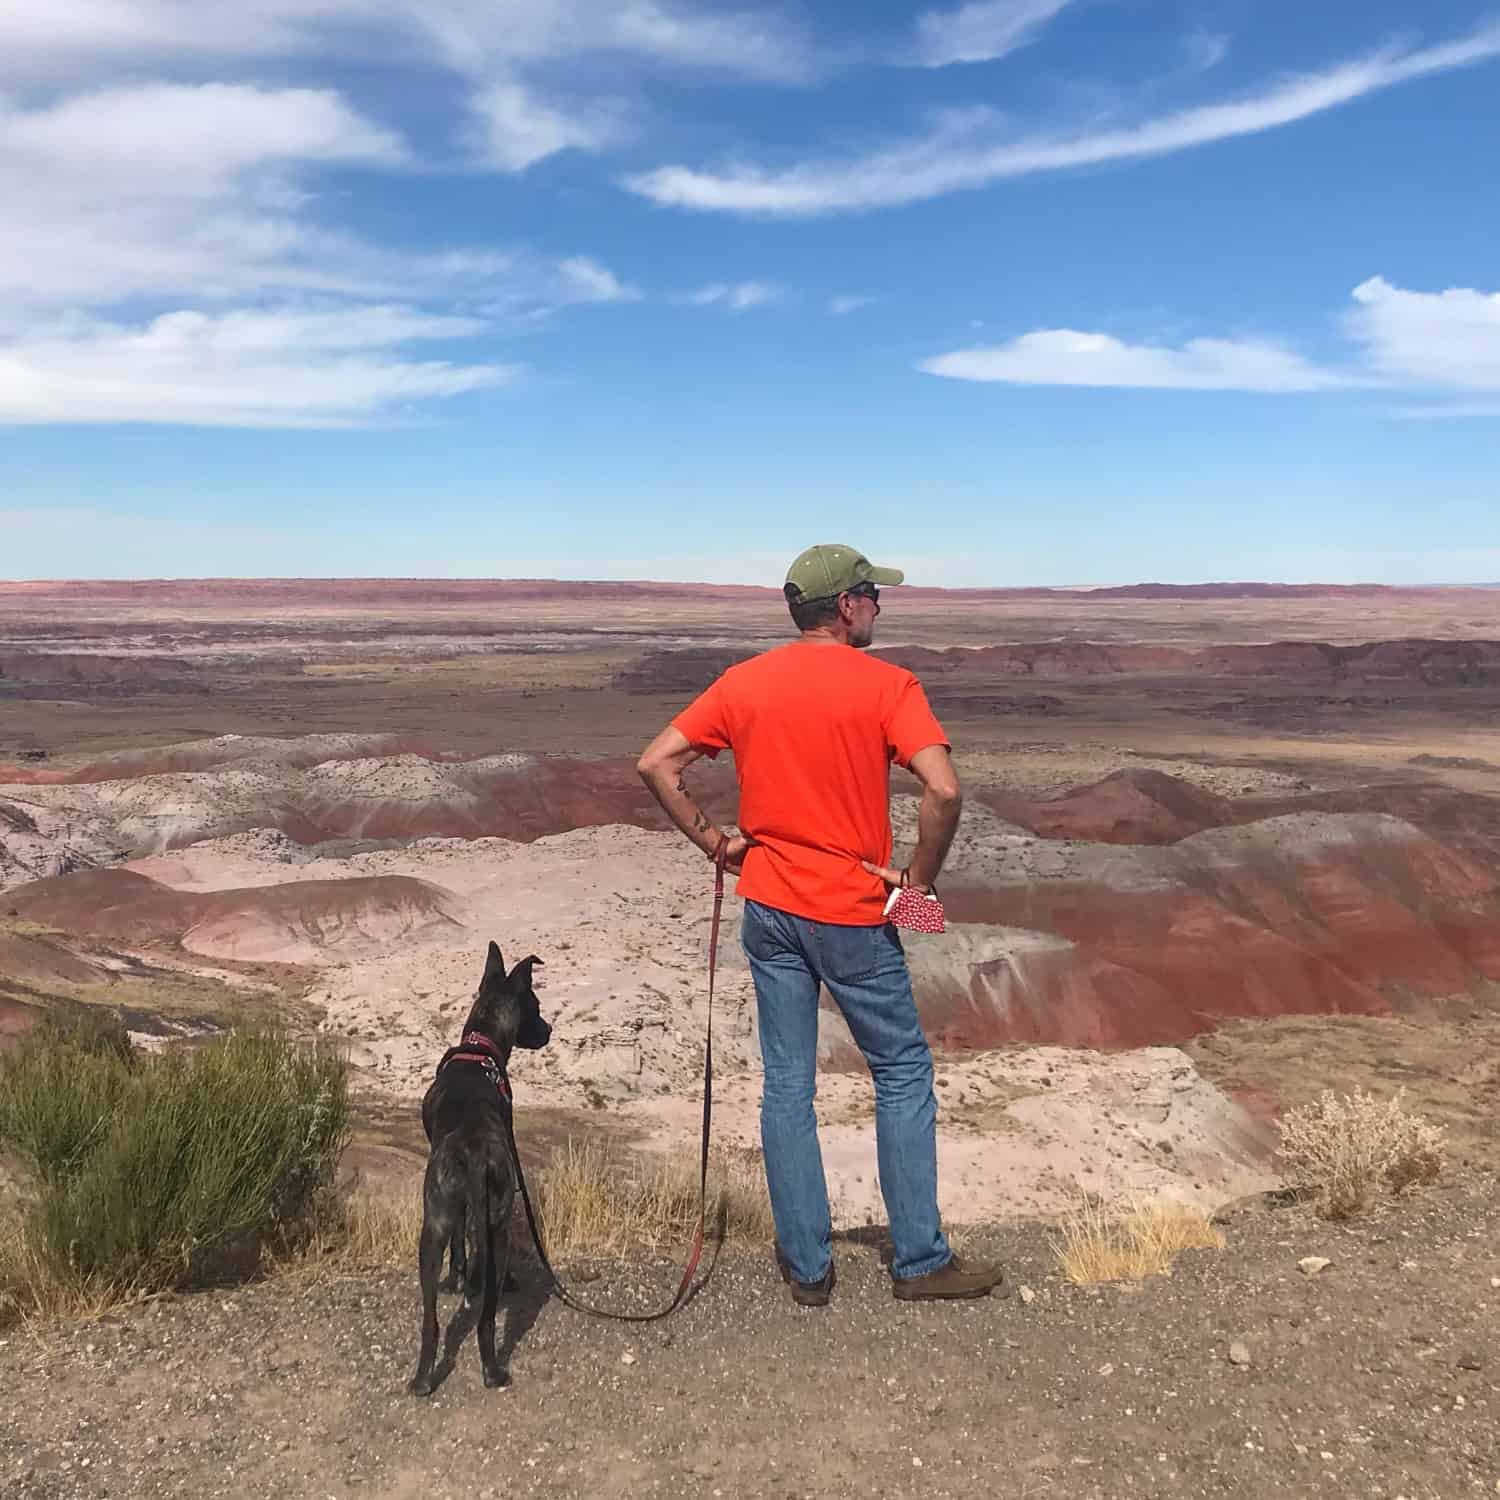 Man and dog standing on rim overlooking landscape at Petrified Forest National Park in AZ